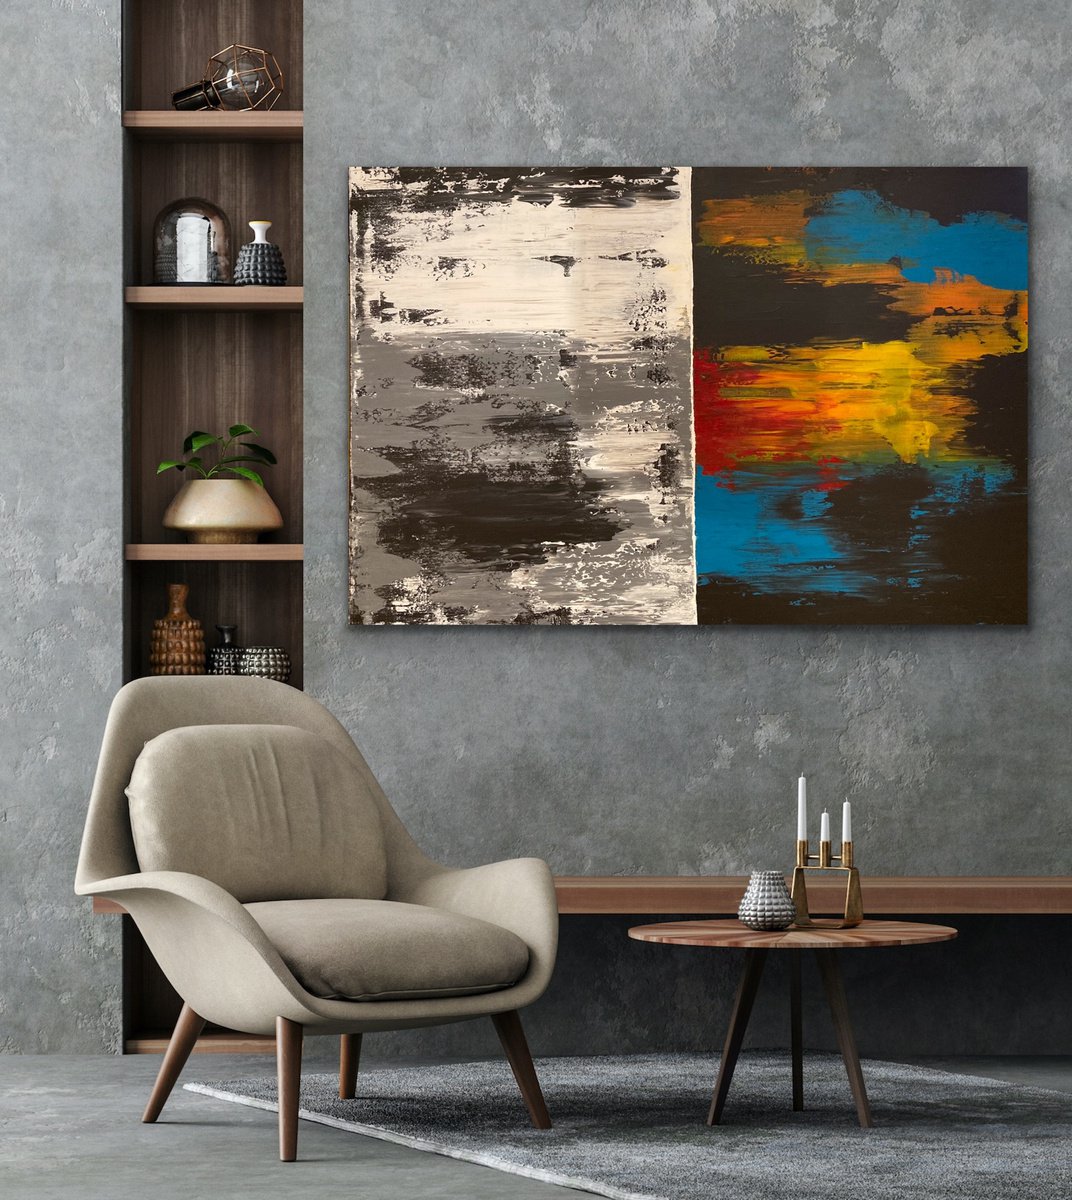 Positive & Negative - Rectangular - Ex-:Large - Abstract - Canvas by Alessandra Viola